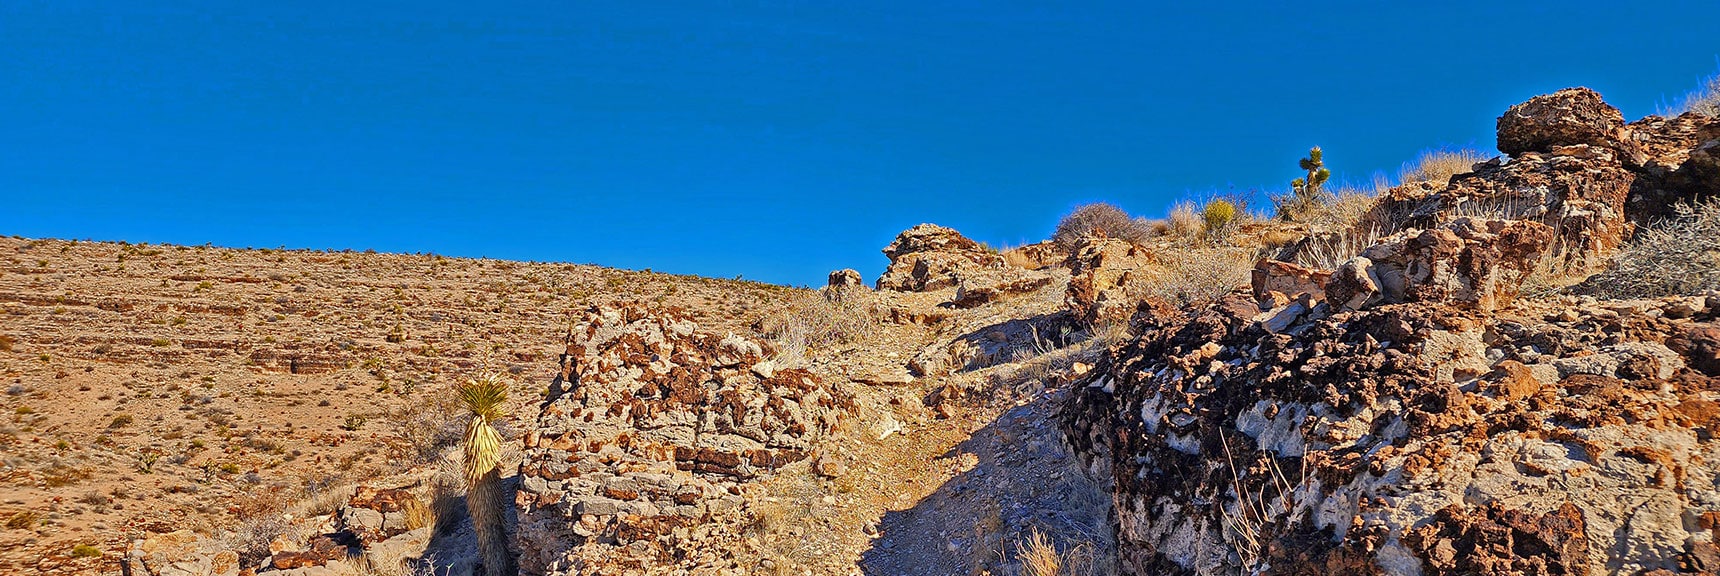 Now Descending Rugged Bone Shaker Trail | Eastern Outer Circuit | Blue Diamond Hill | Red Rock Canyon, Nevada